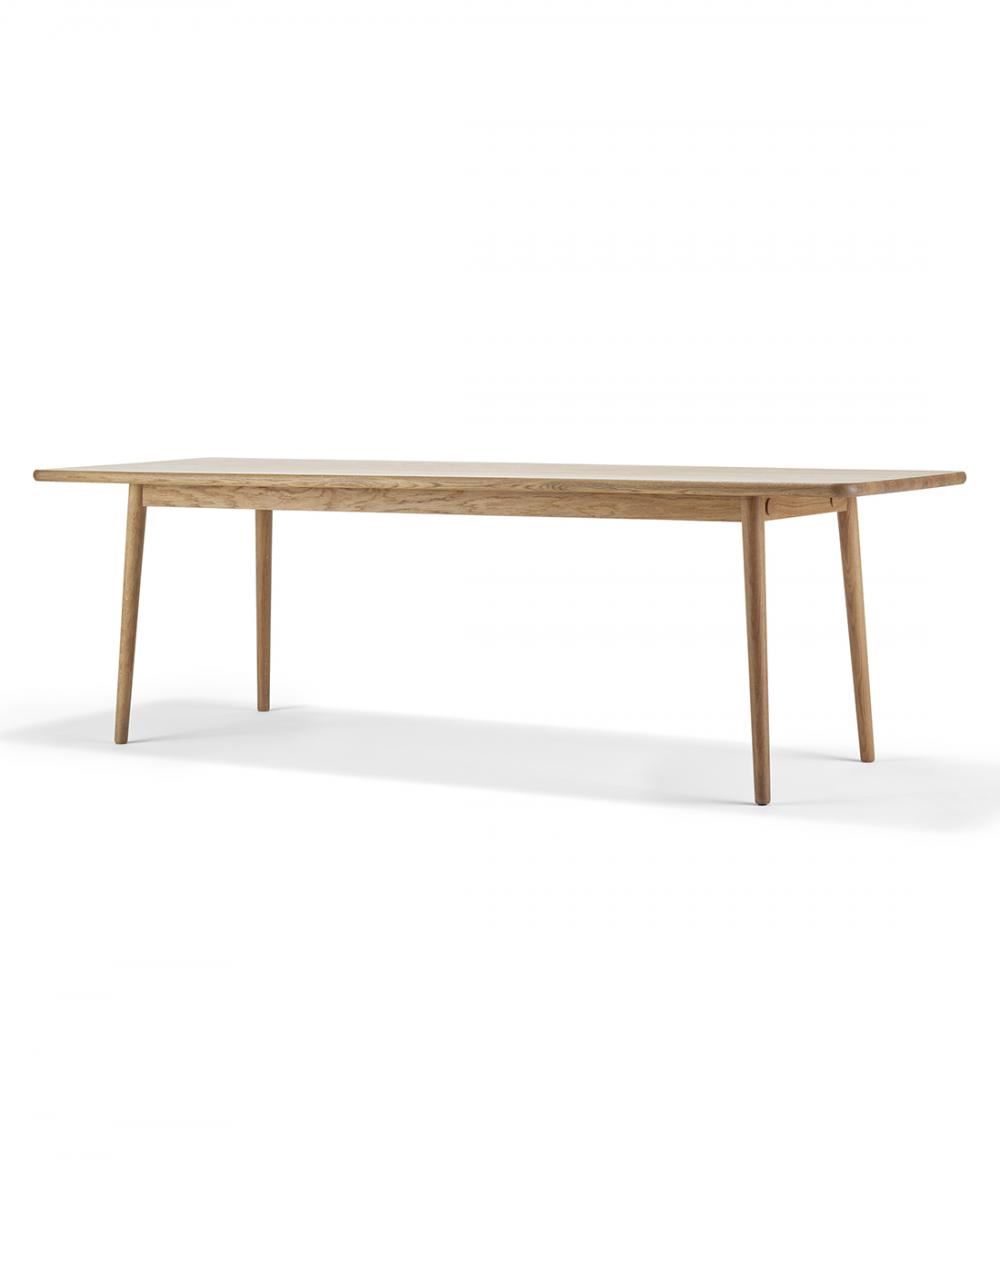 Stolab Miss Holly Table Rectangular Birch 175 X 82cm With 2 Extension Plate Light Wood Designer Furniture From Holloways Of Ludlow